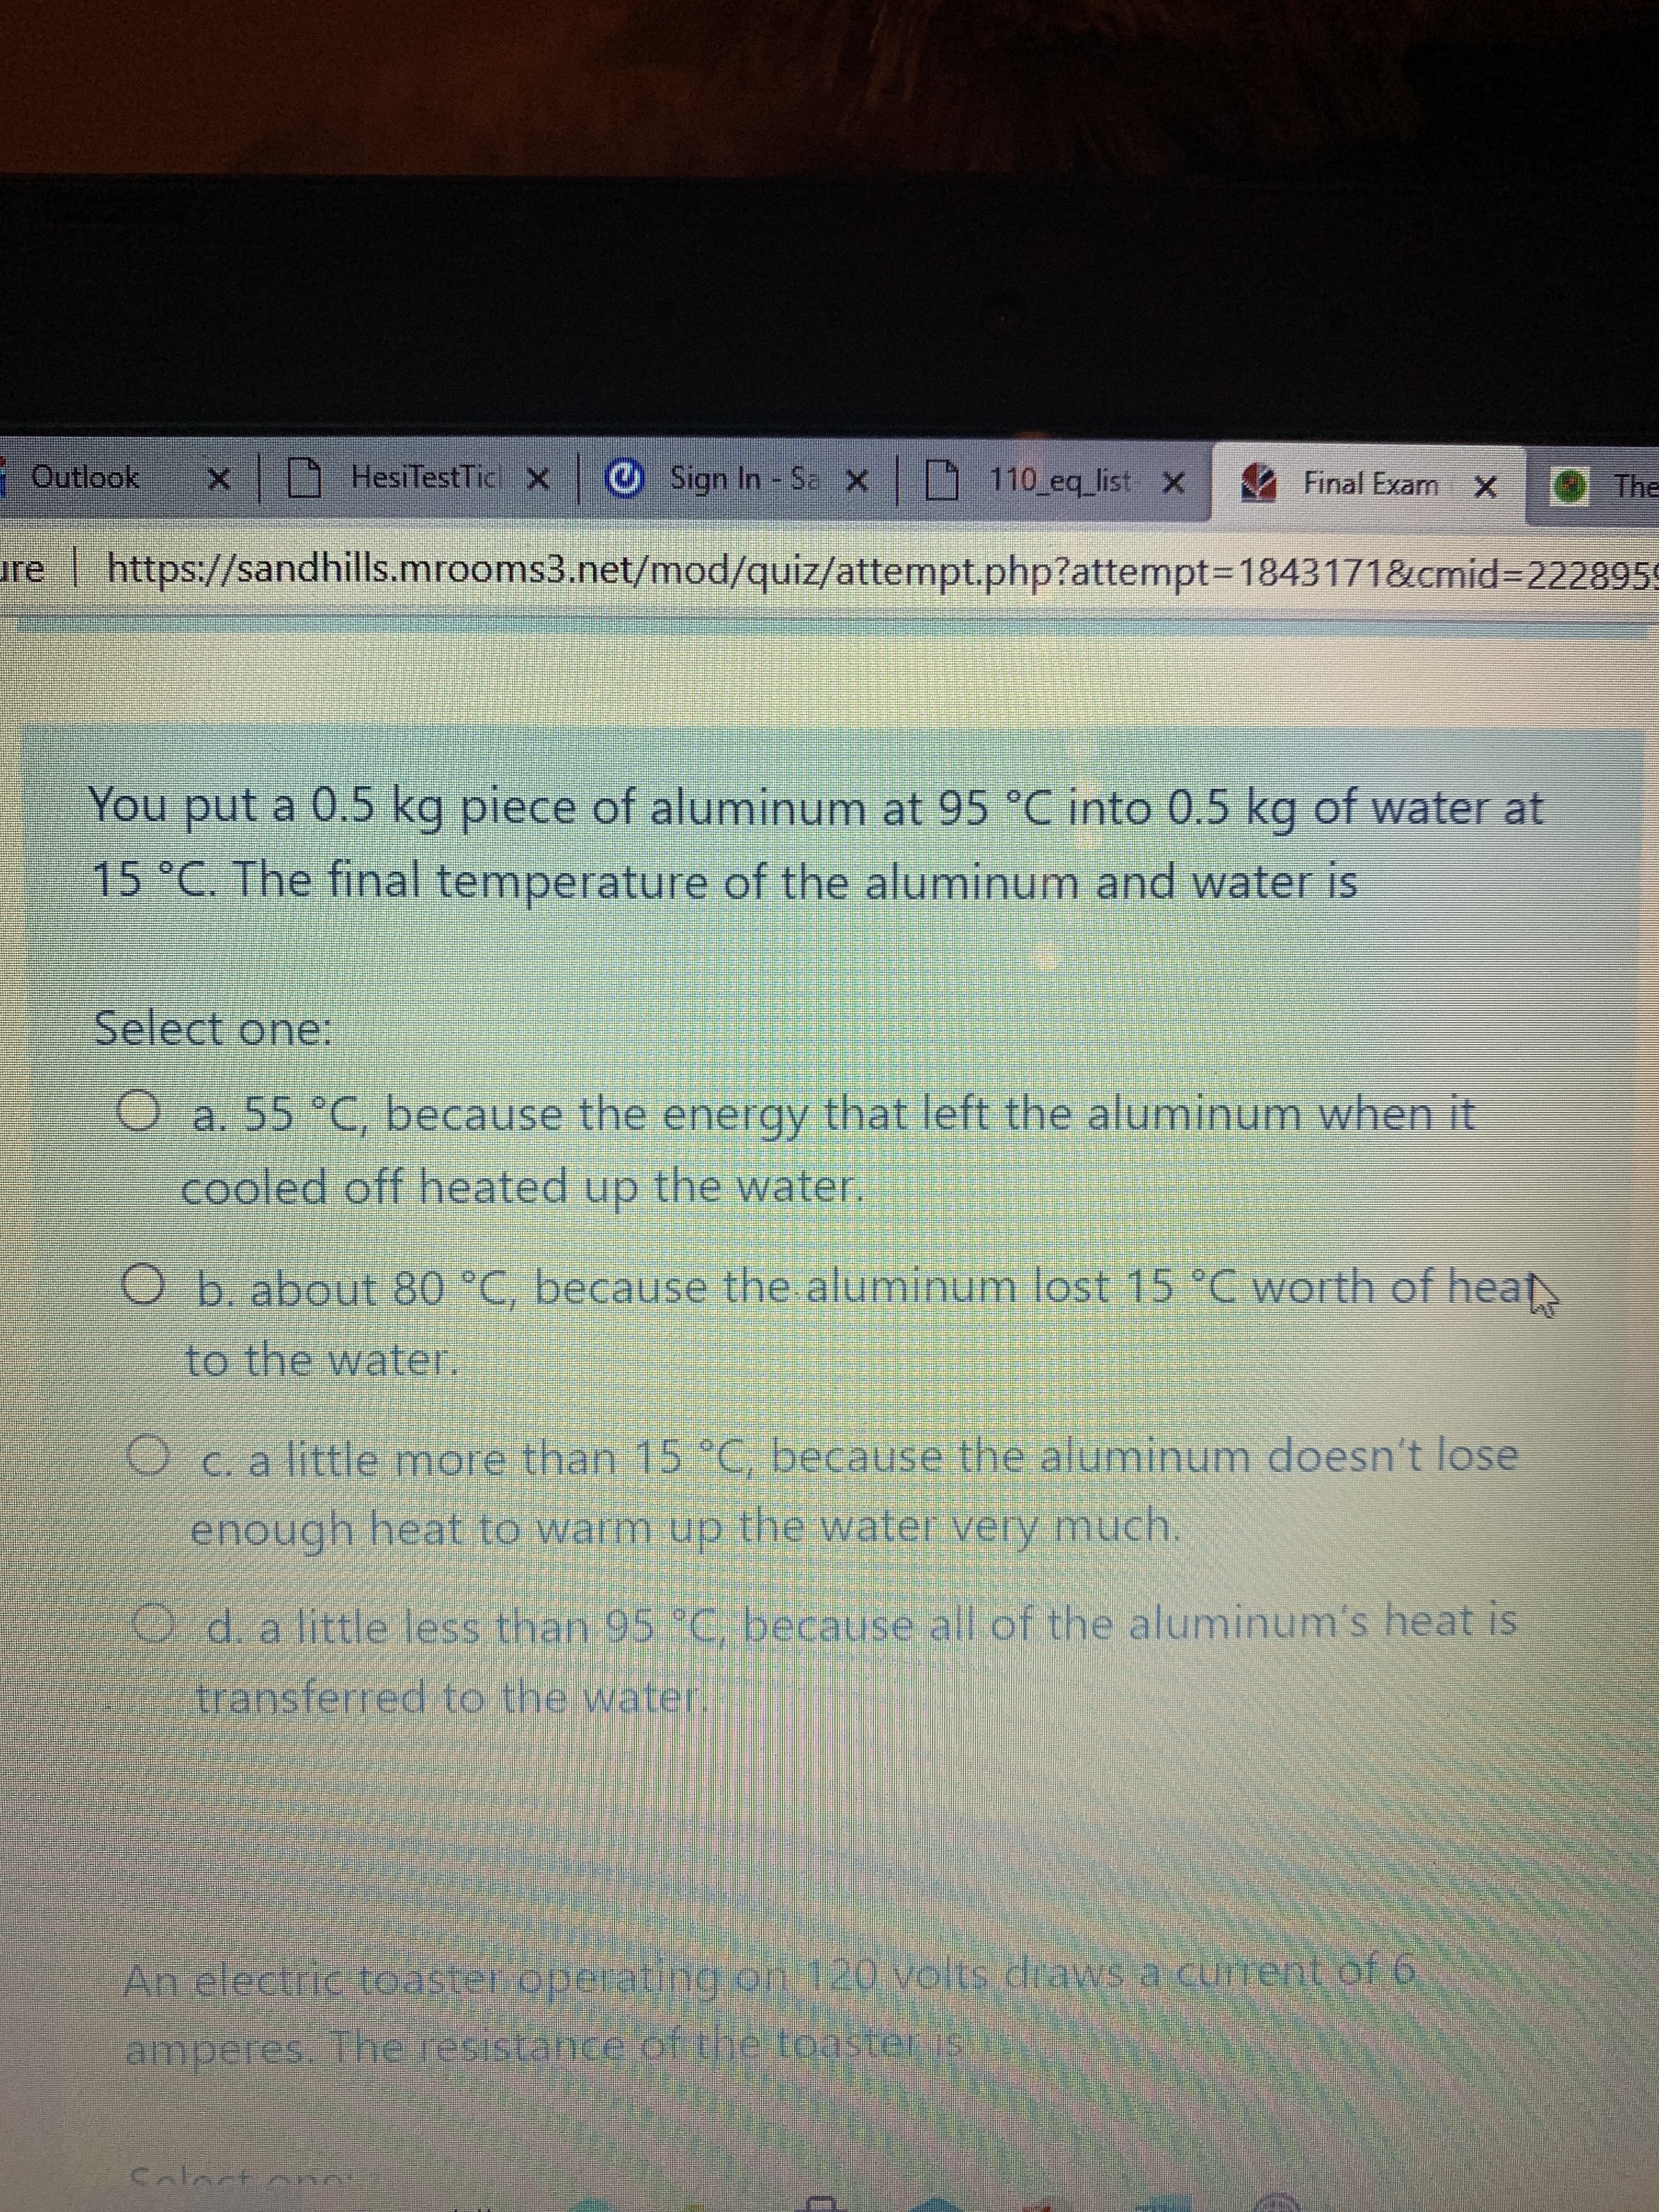 You put a 0.5 kg piece of aluminum at 95 °C into 0.5 kg of water at
15 °C. The final temperature of the aluminum and water is
